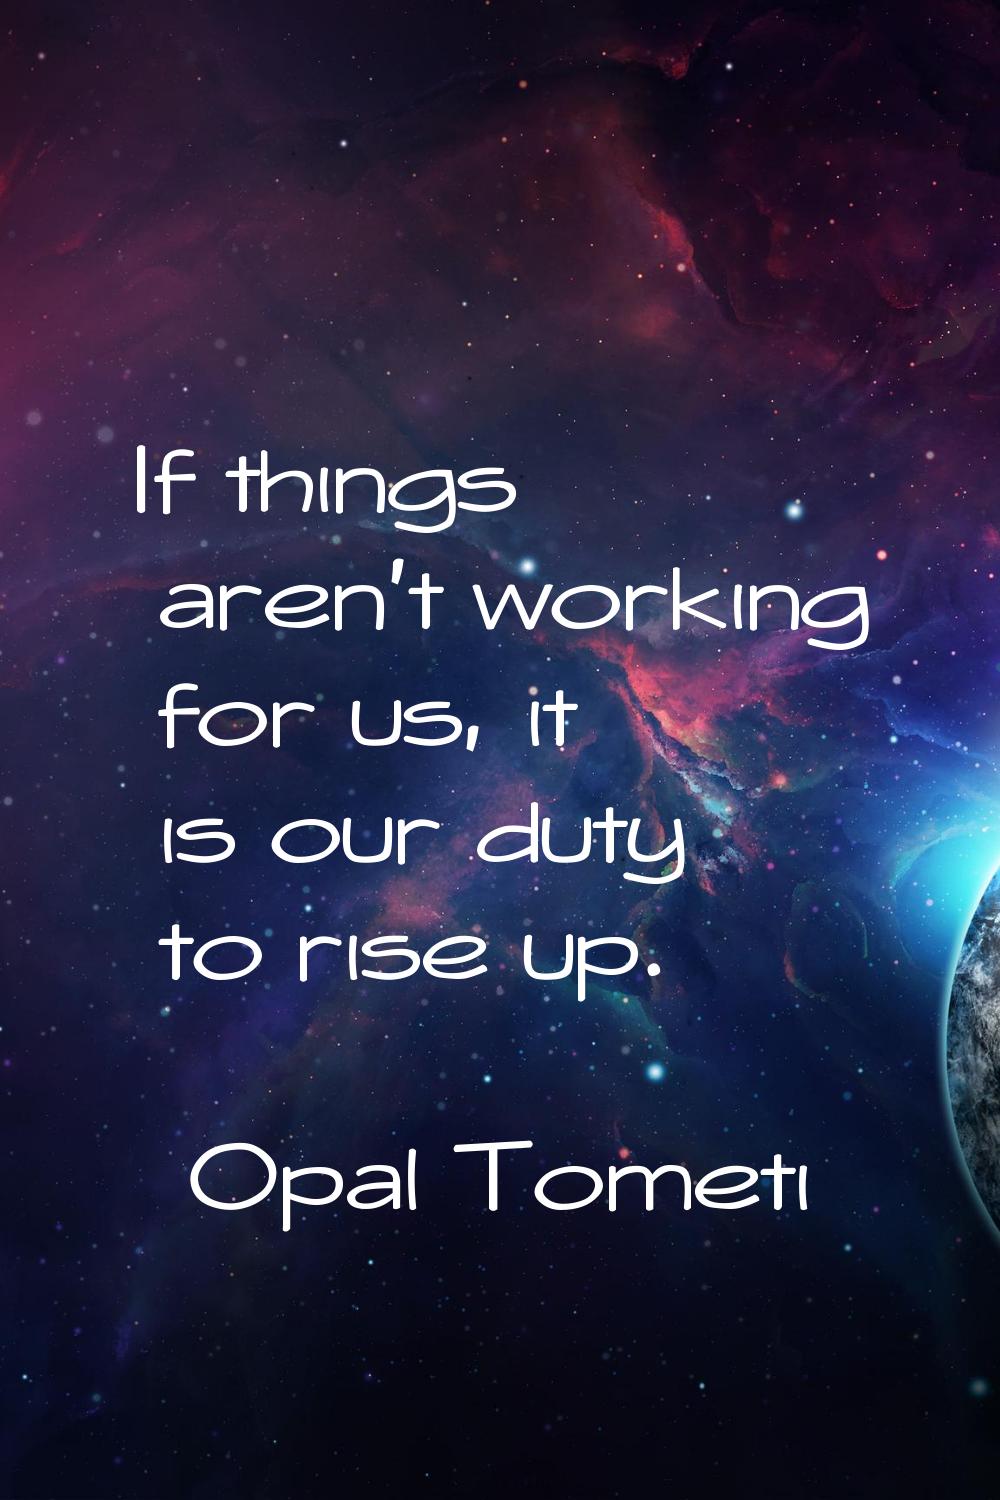 If things aren't working for us, it is our duty to rise up.